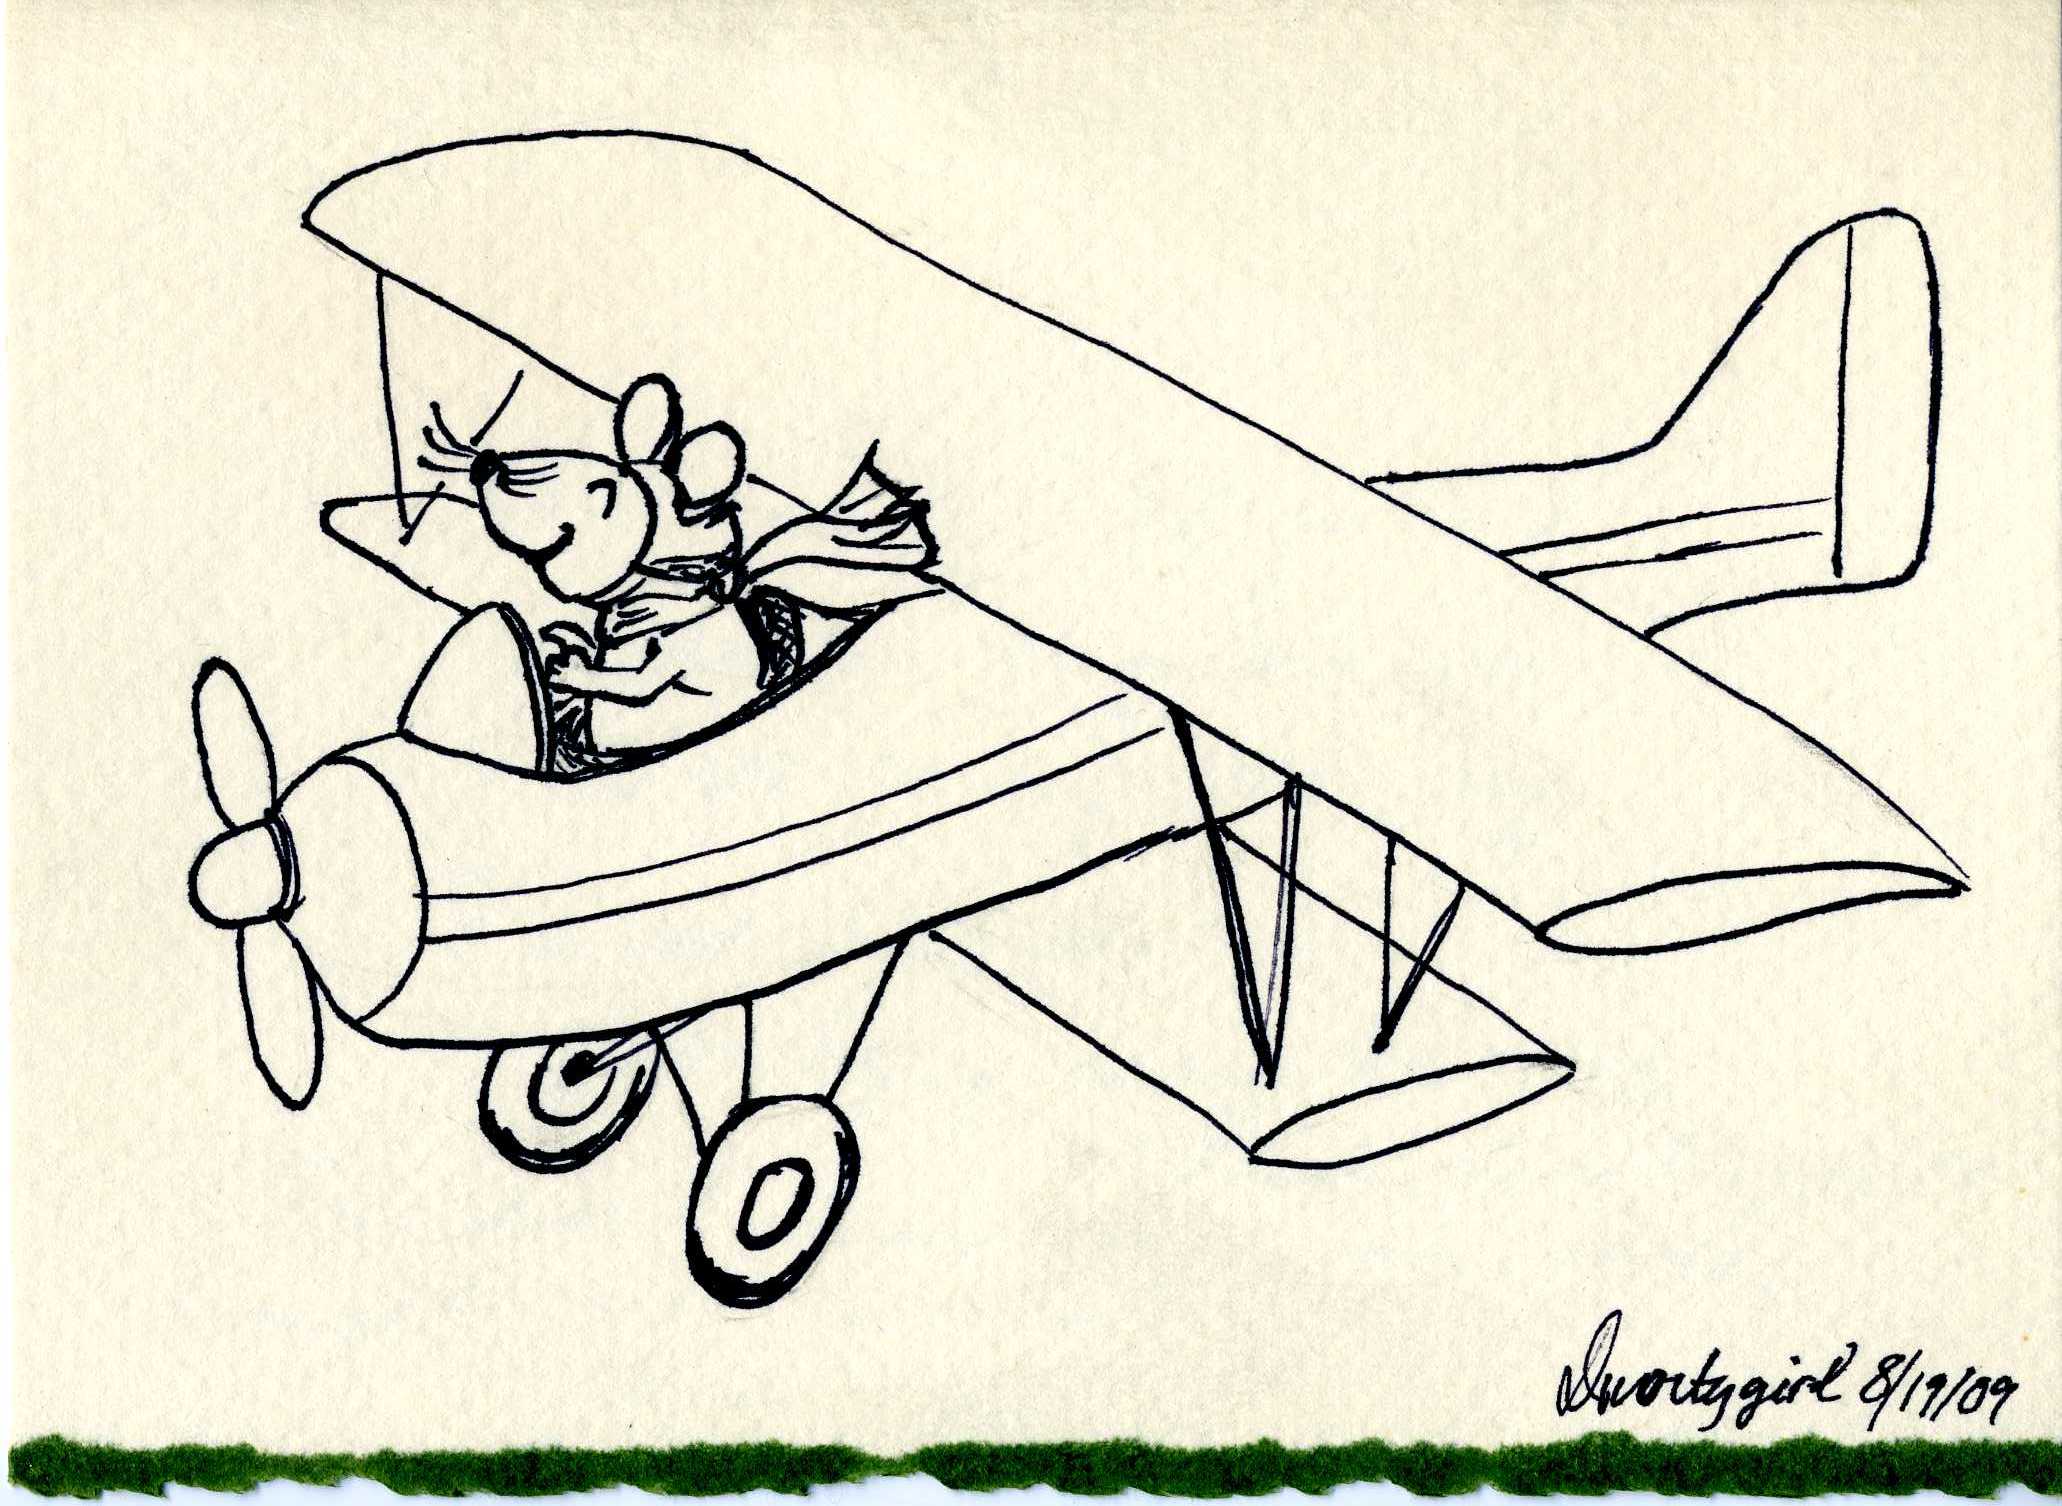 a drawing of a mouse flying on an airplane